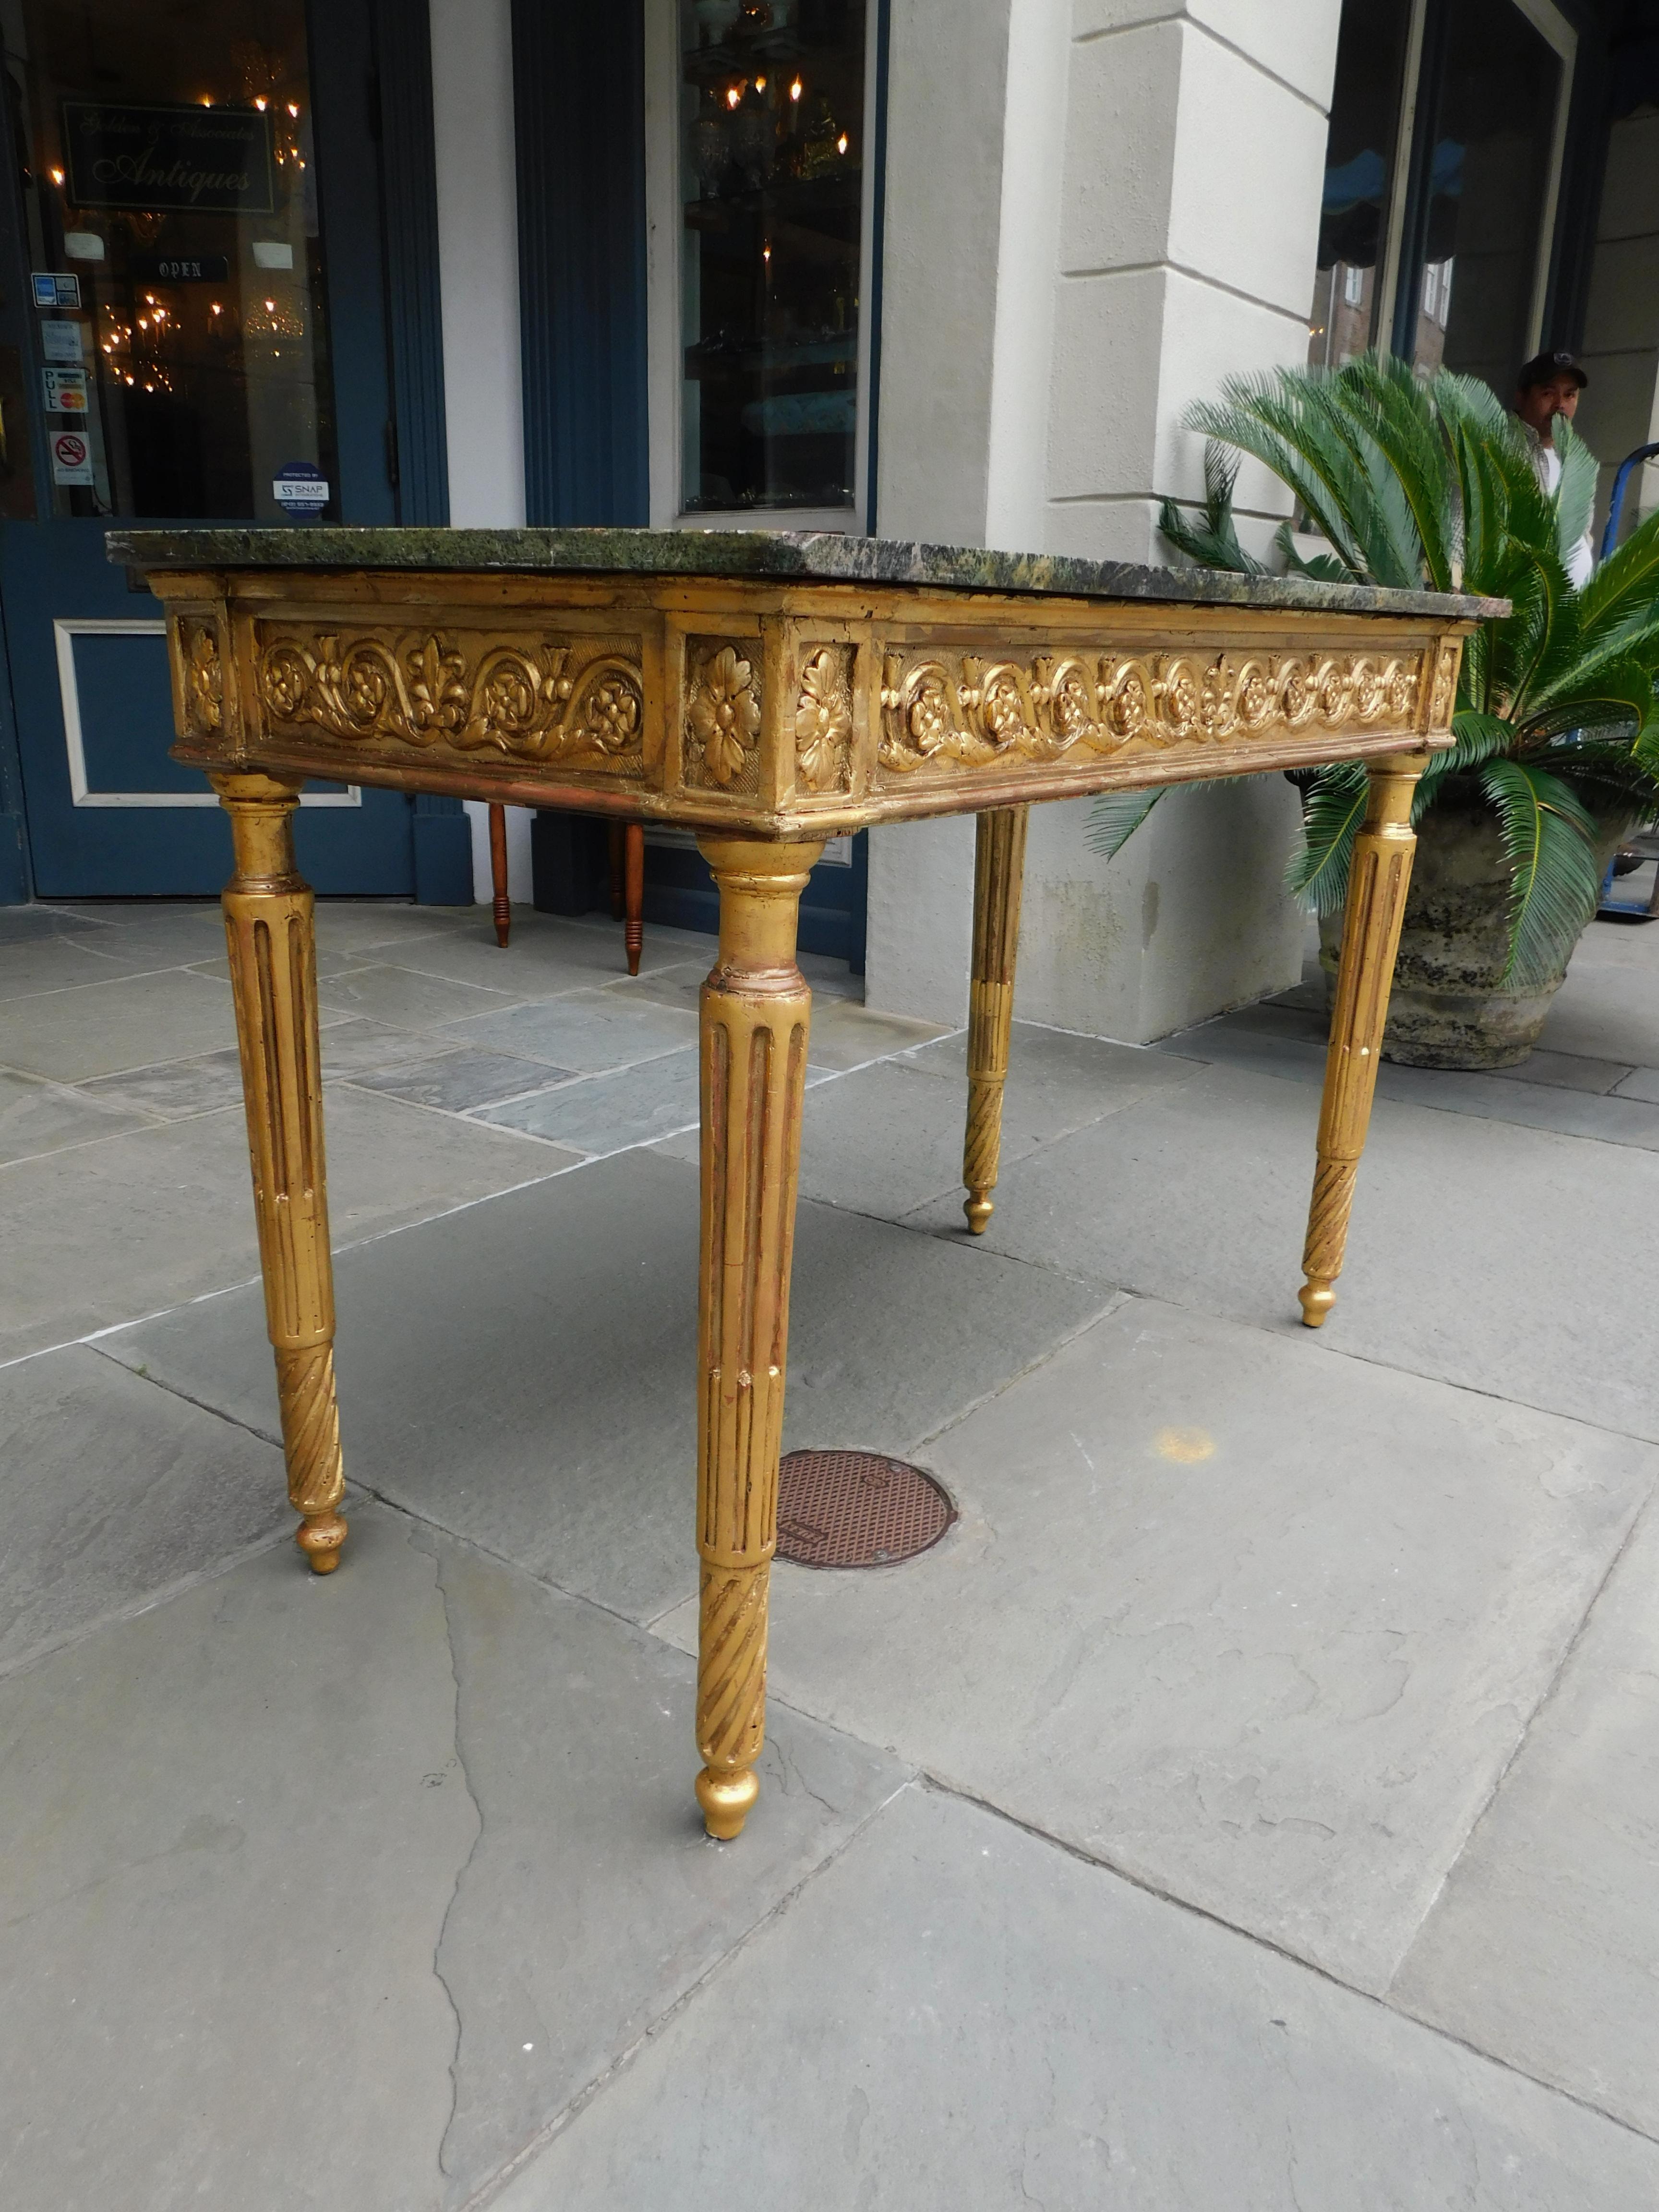 Late 18th Century Italian Gilt Wood Marble Top Foliage Console Table with Fluted Legs, Circa 1770 For Sale